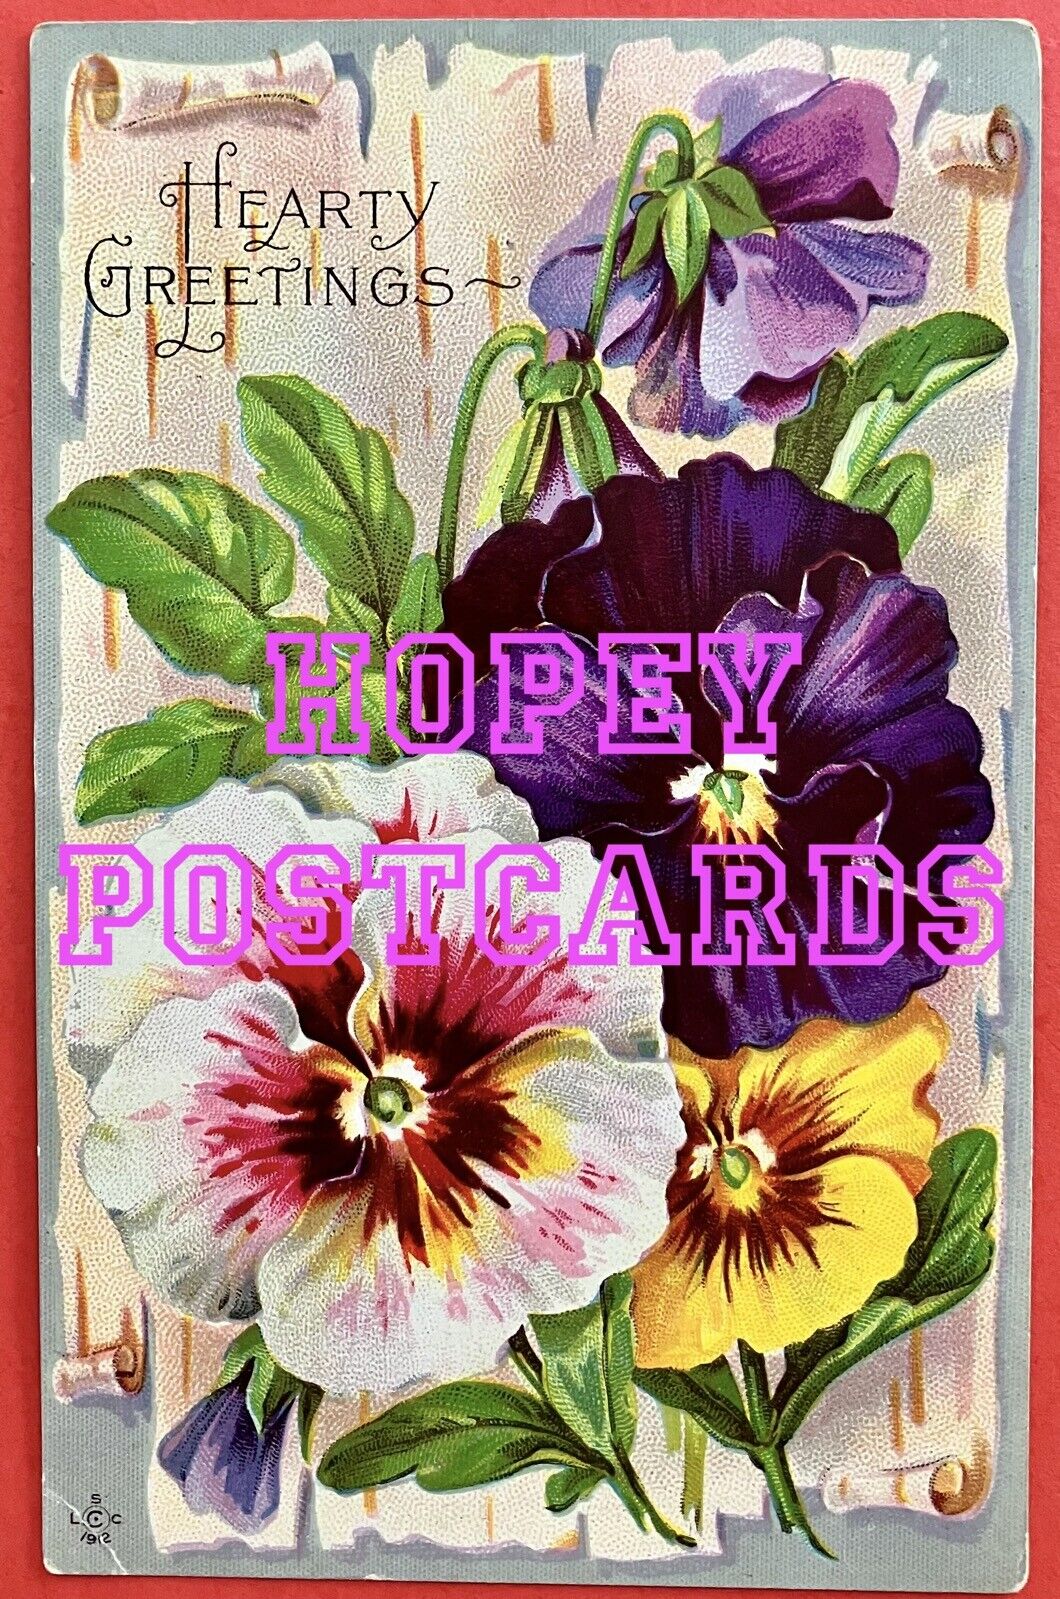 Antique PANSY HEARTY GREETINGS postcard~glossy, bright colors~unused 1907-1914  